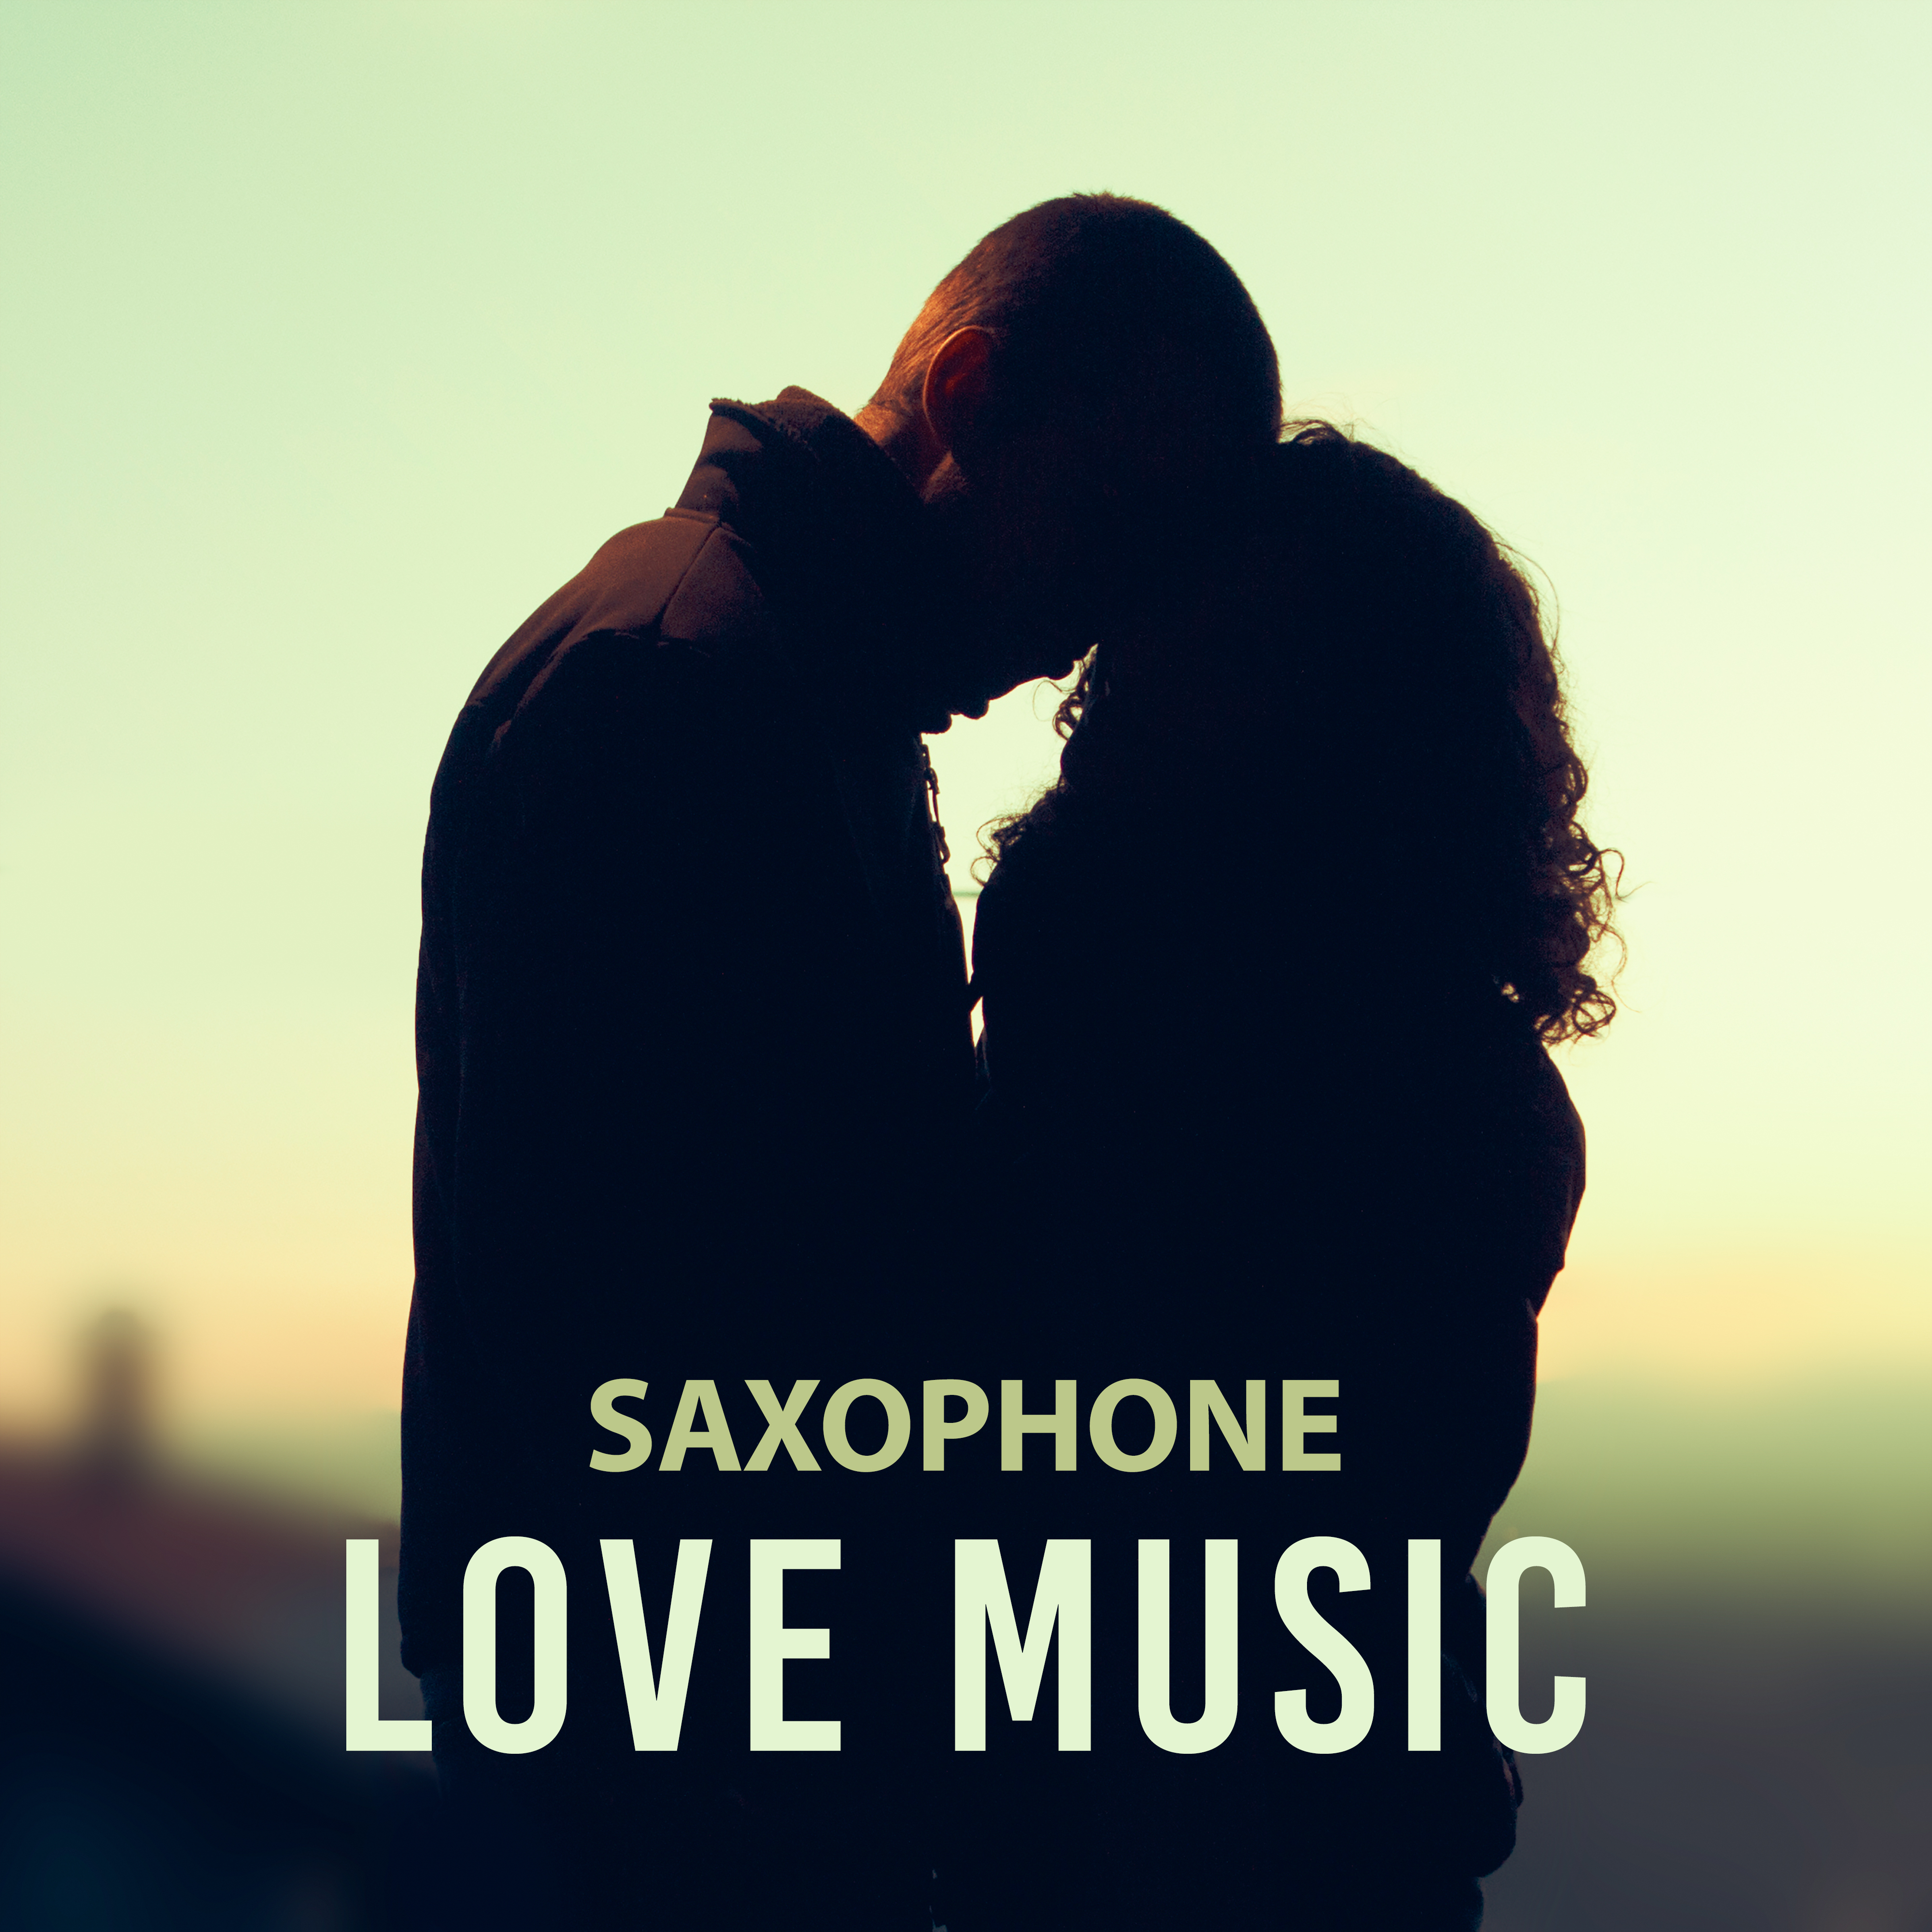 Saxophone Love Music – Easy Listening, Instrumental Jazz for Lovers, Chilled Sounds, Love Music